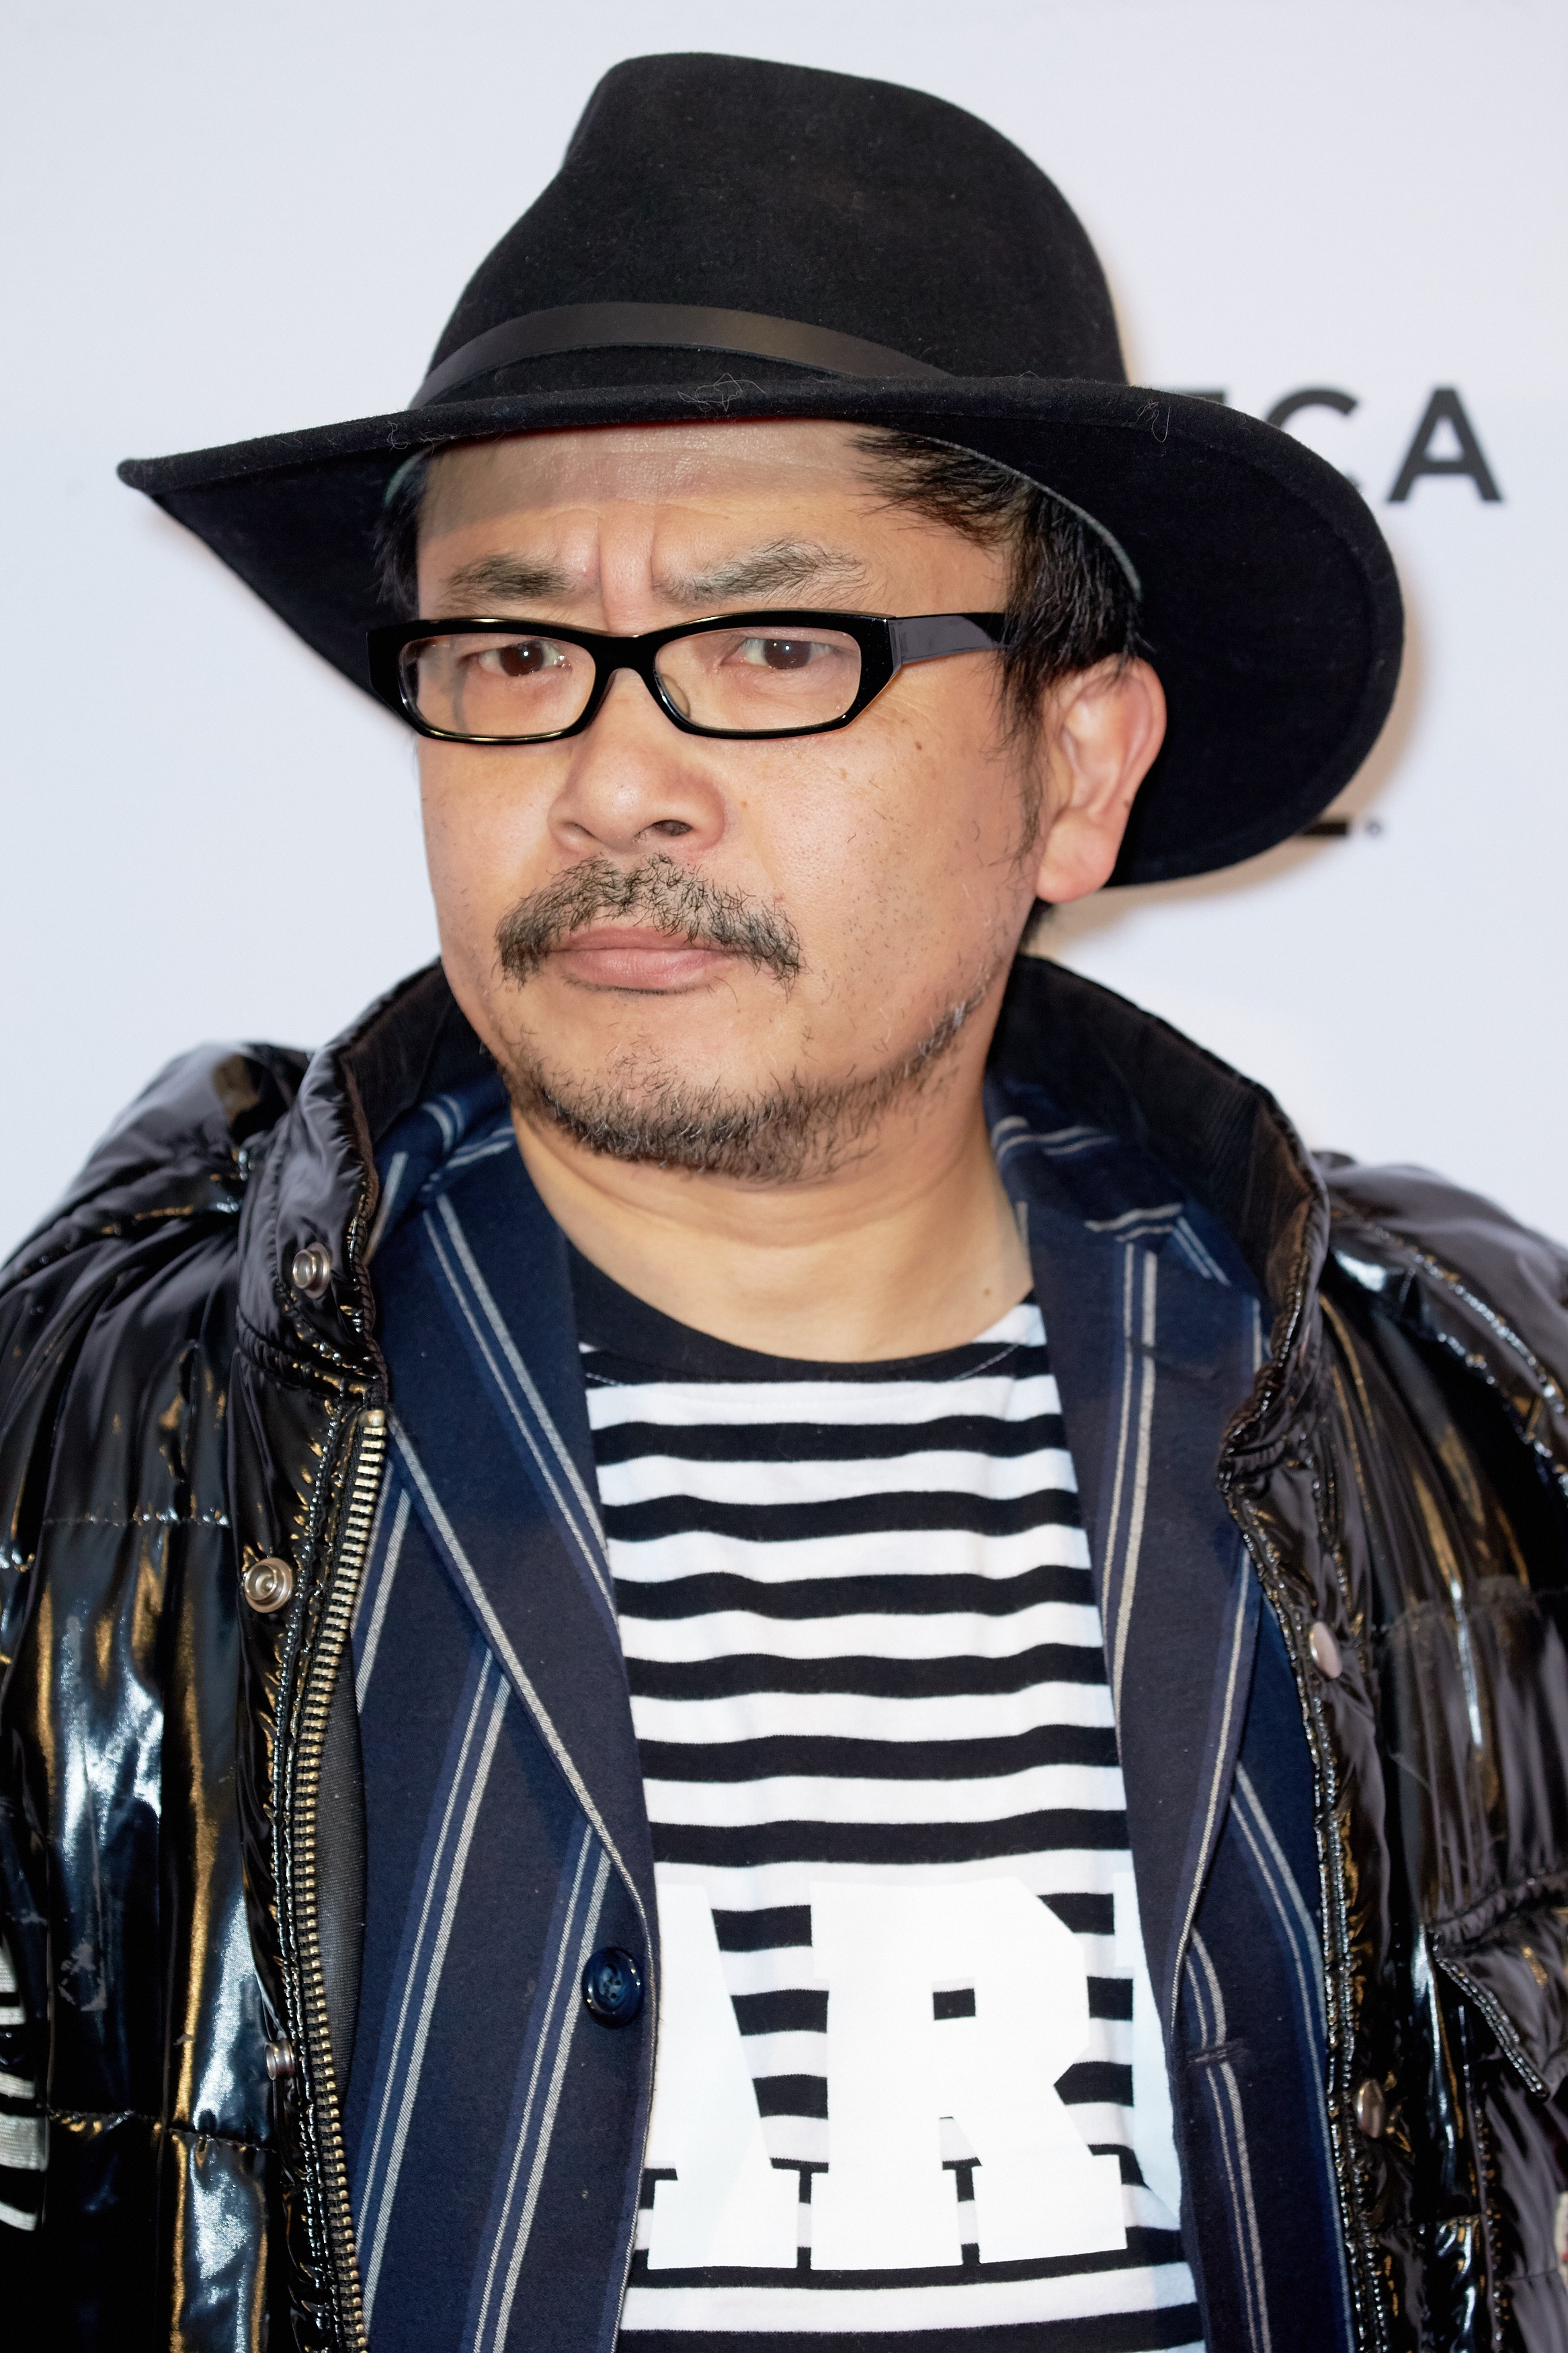 NEW YORK, NY - APRIL 14: Director Sion Sono at 'Madly' Premiere - 2016 Tribeca Film Festival at Chelsea Bow Tie Cinemas on April 14, 2016 in New York City. (Photo by Oleg Nikishin/Epsilon/Getty Images) (Foto: Getty Images)